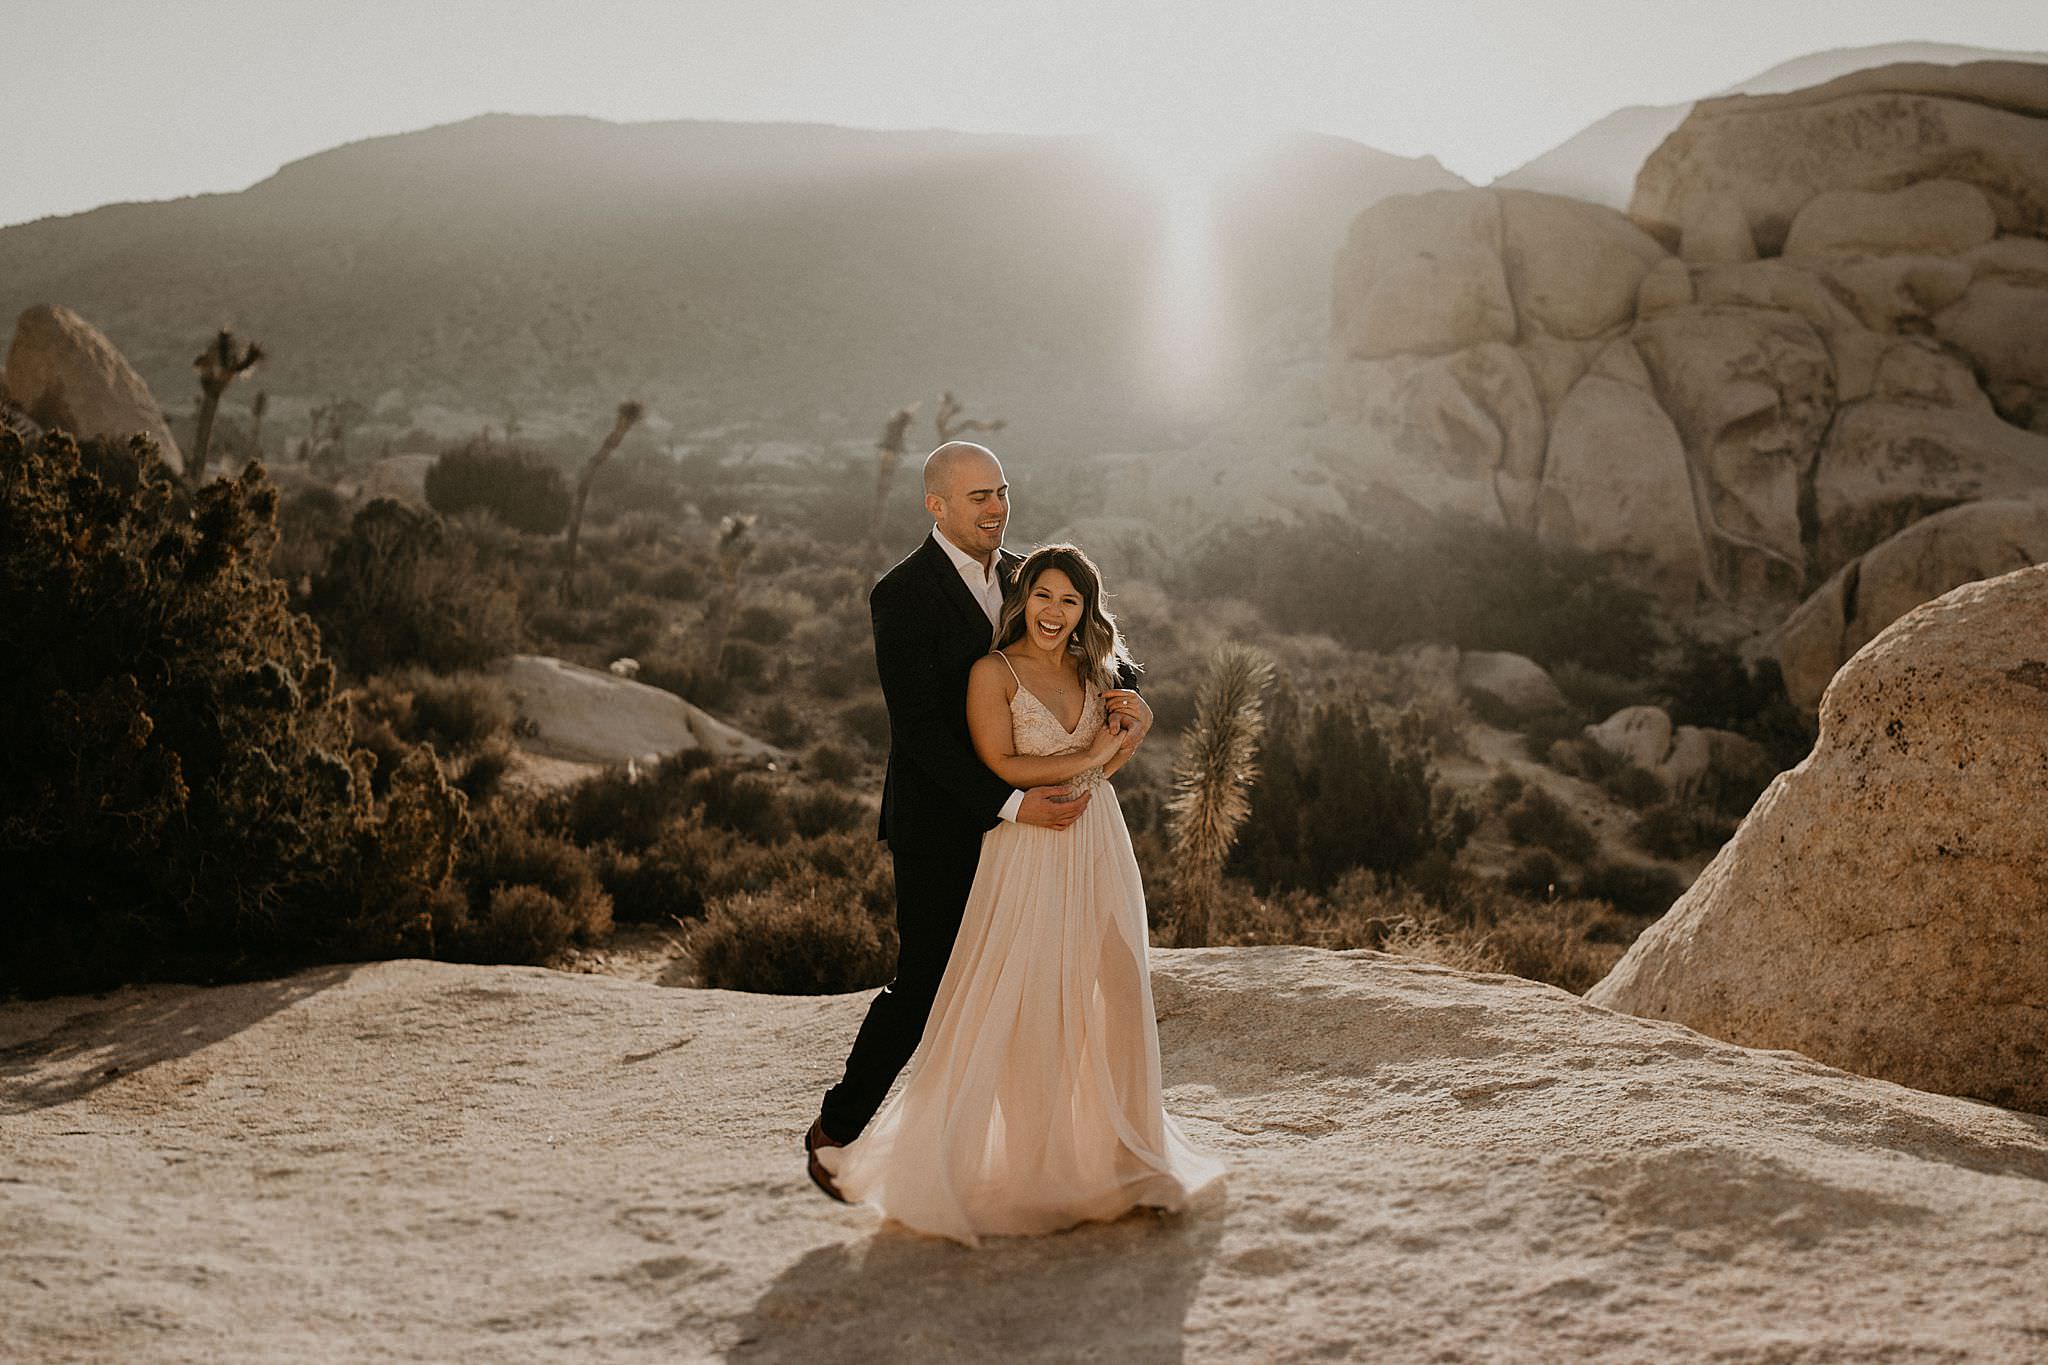 Couple eloped at Joshua Tree national park in Southern California